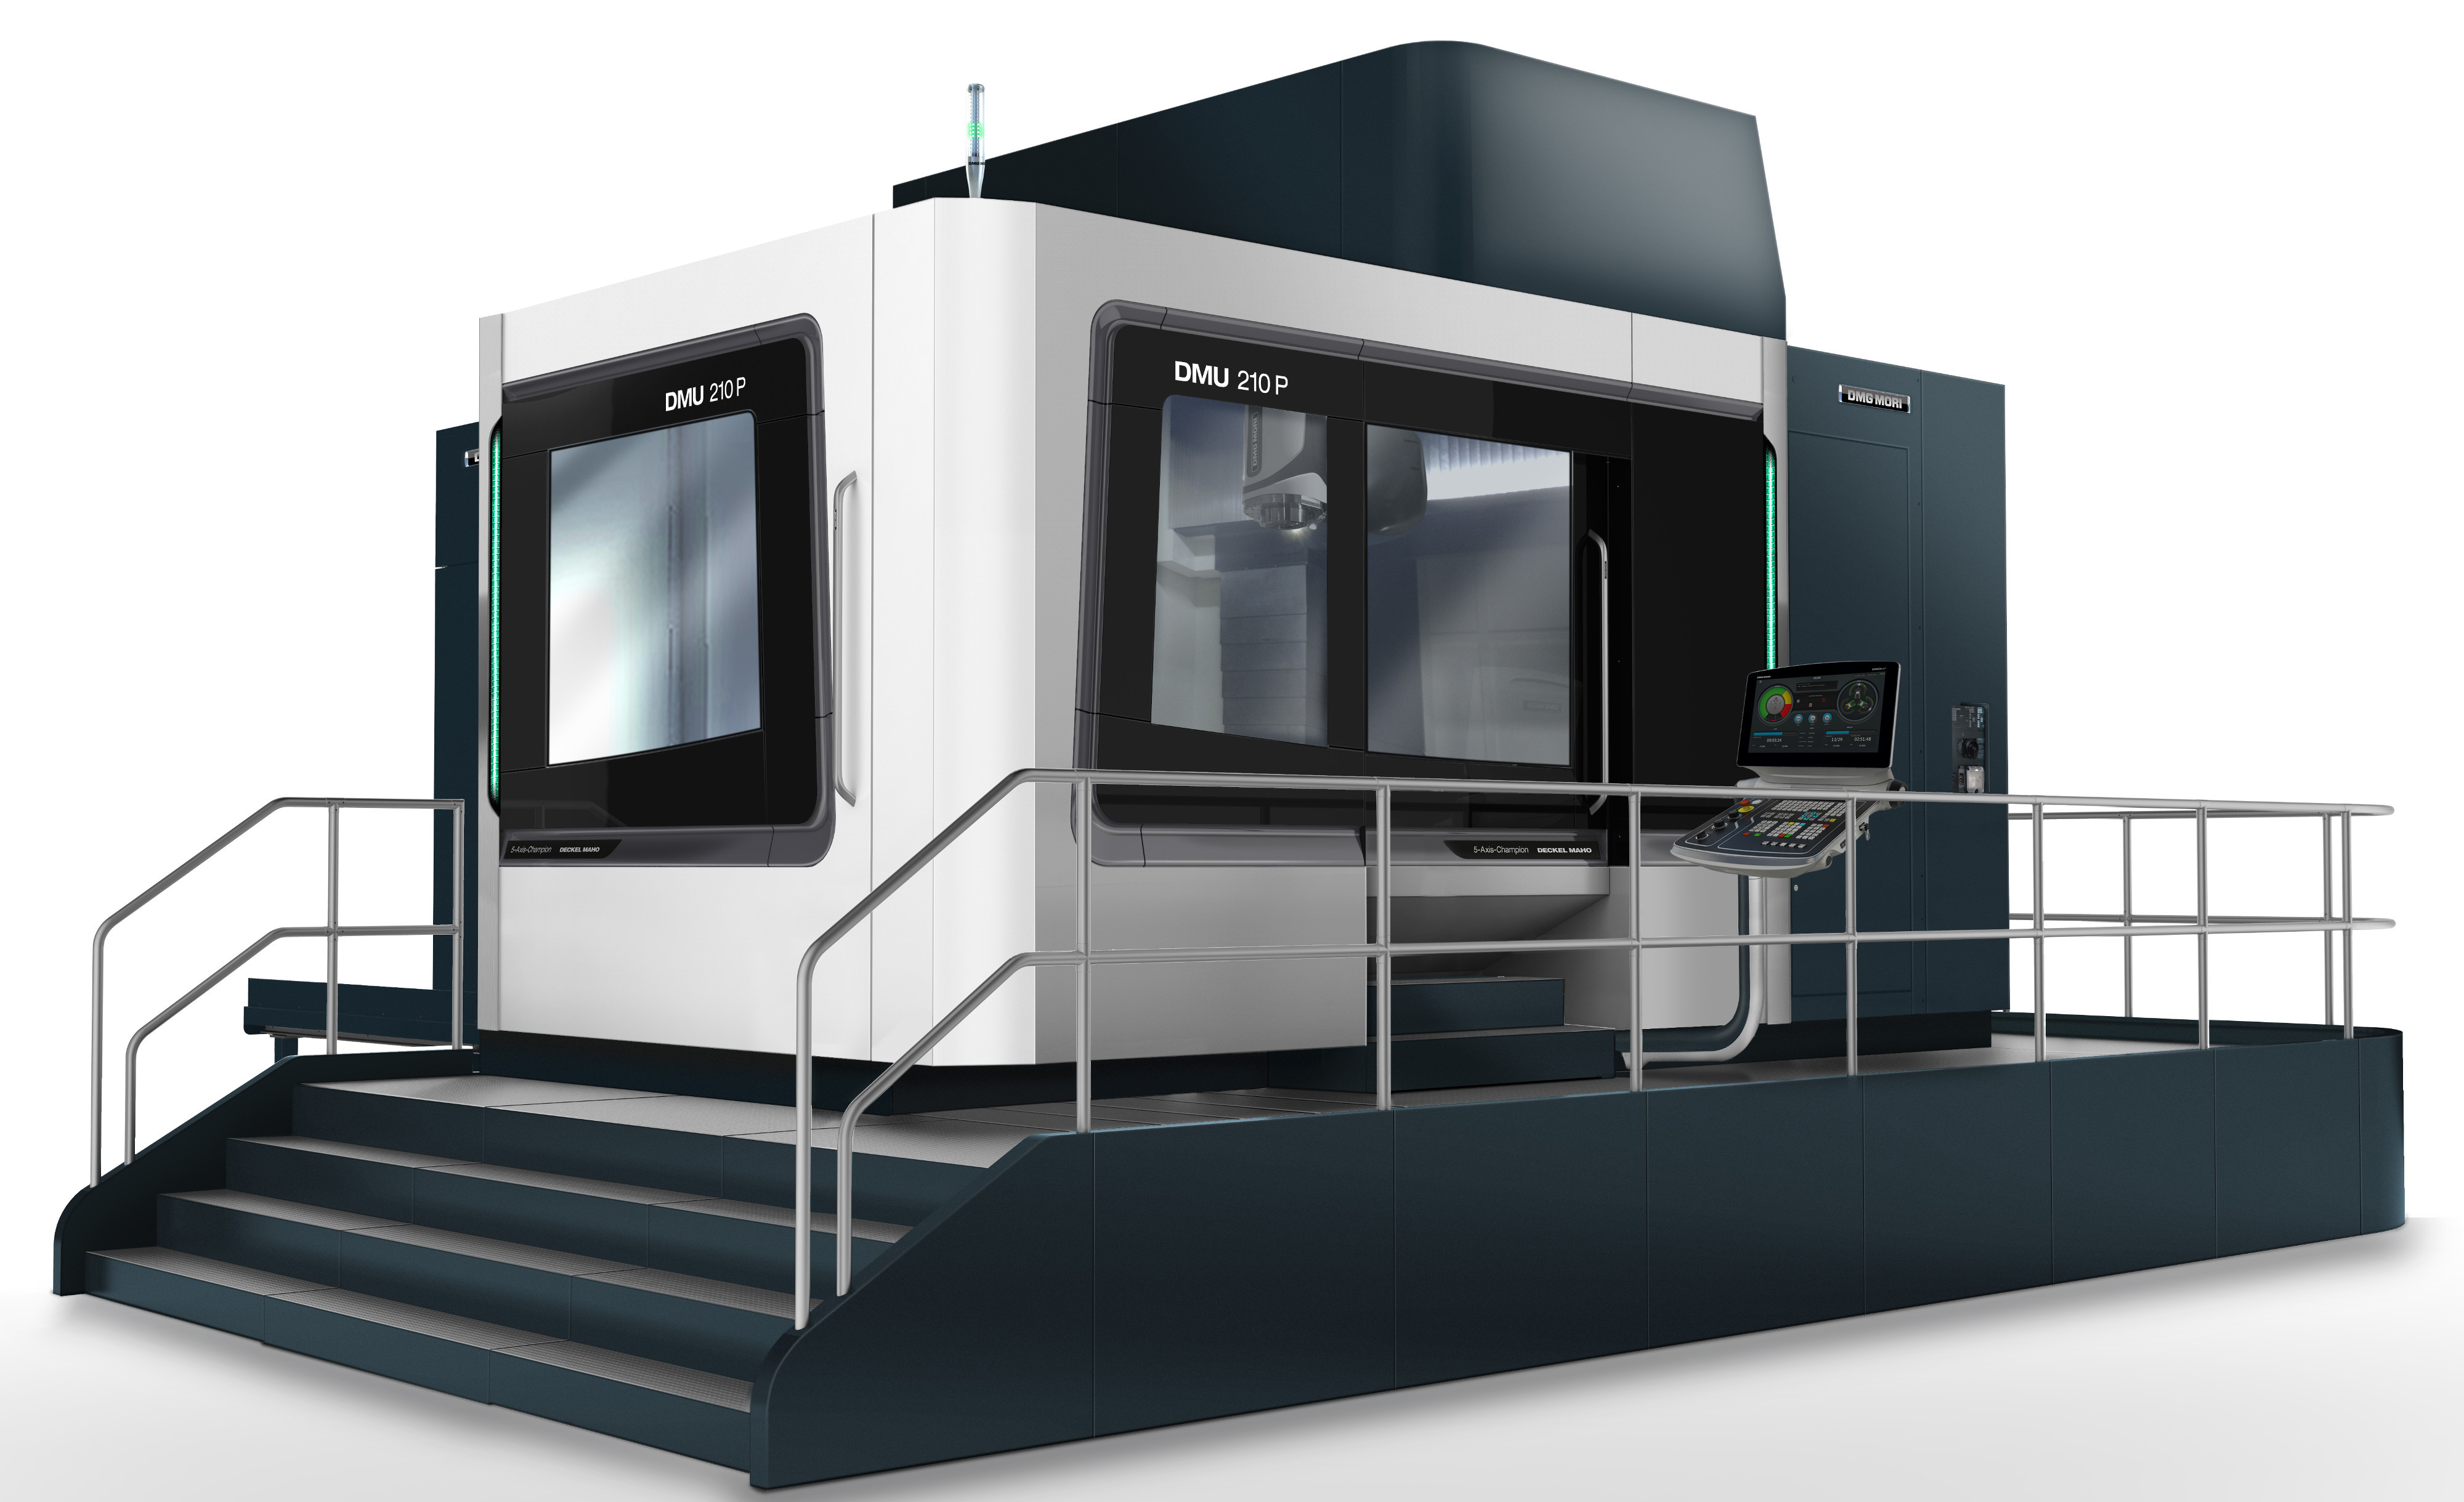 DMG MORI’s gantry series extends from the DMU 600 P in the XXL area to the DMU 210 P little sister machine. Picture: DMG MORI 